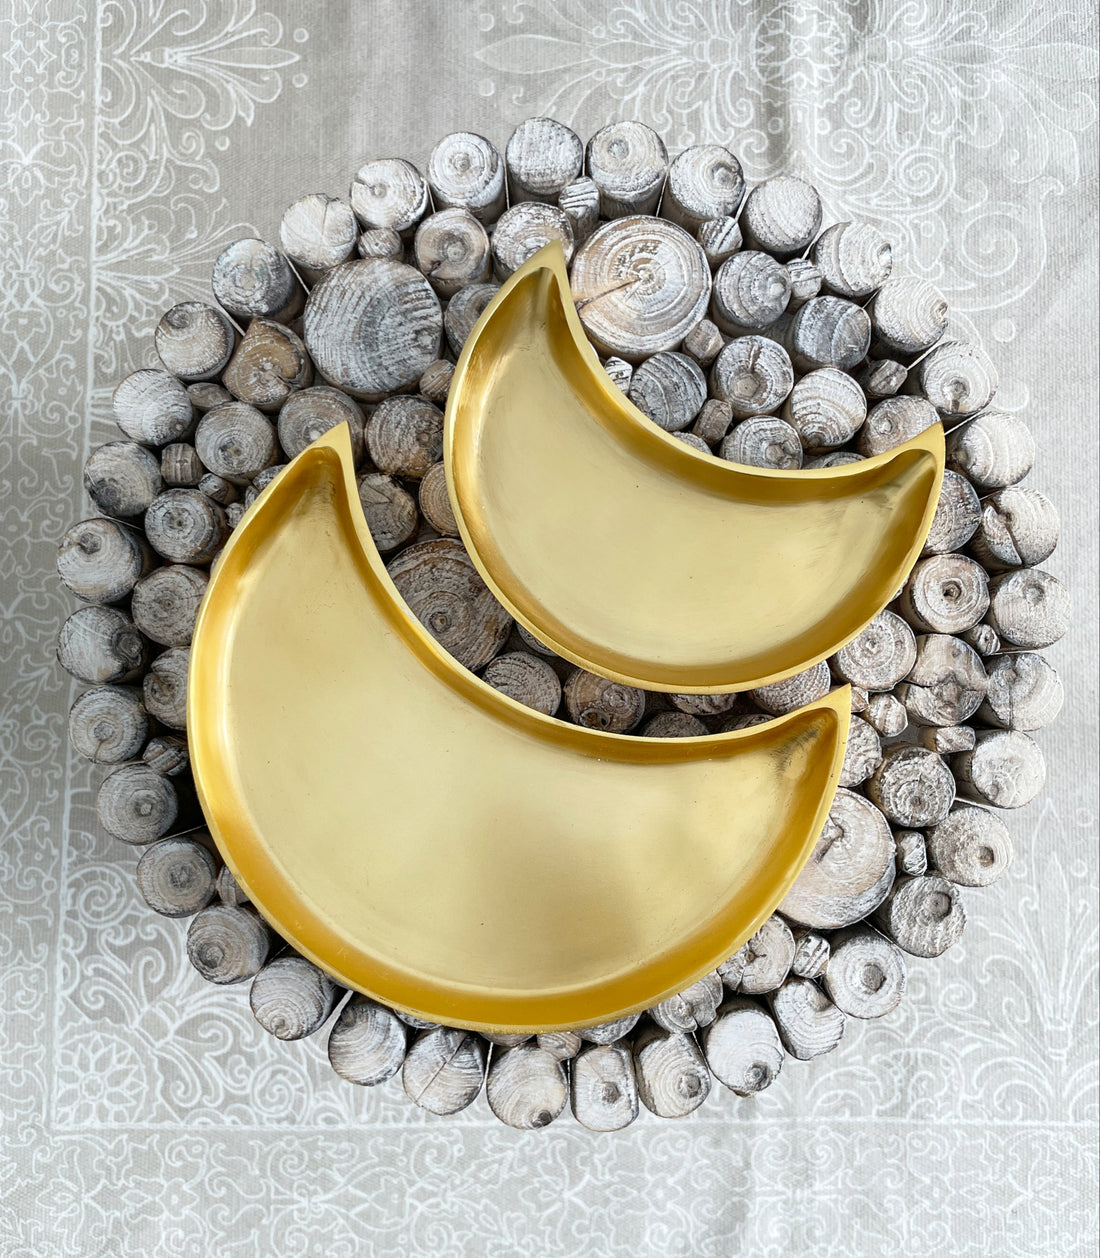 large and medium size Moonlight Platters used to enhance iftar table décor